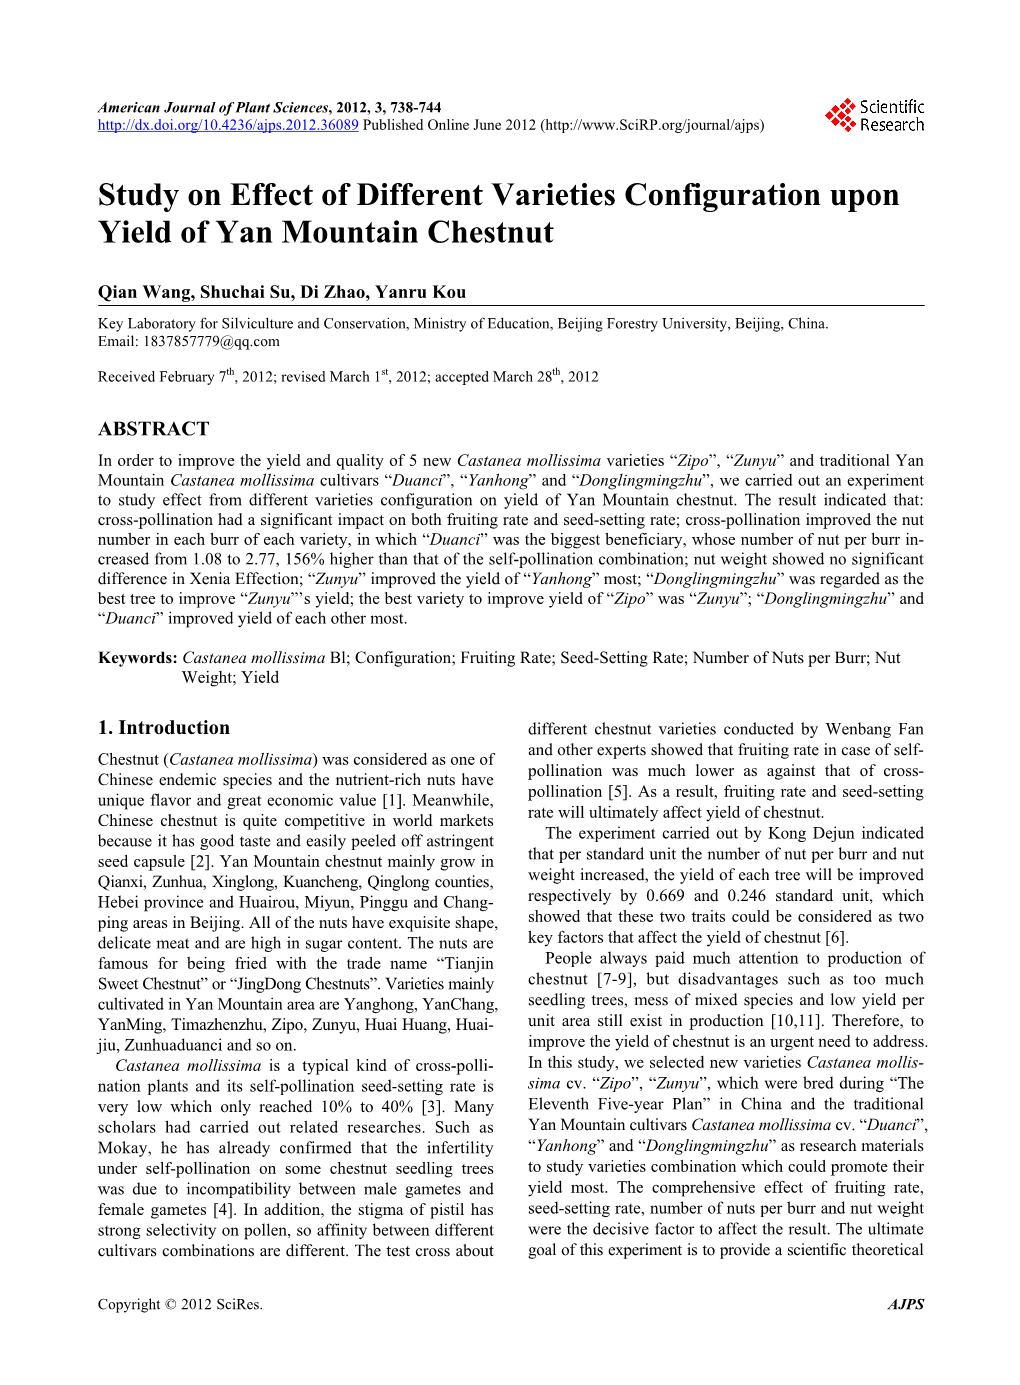 Study on Effect of Different Varieties Configuration Upon Yield of Yan Mountain Chestnut